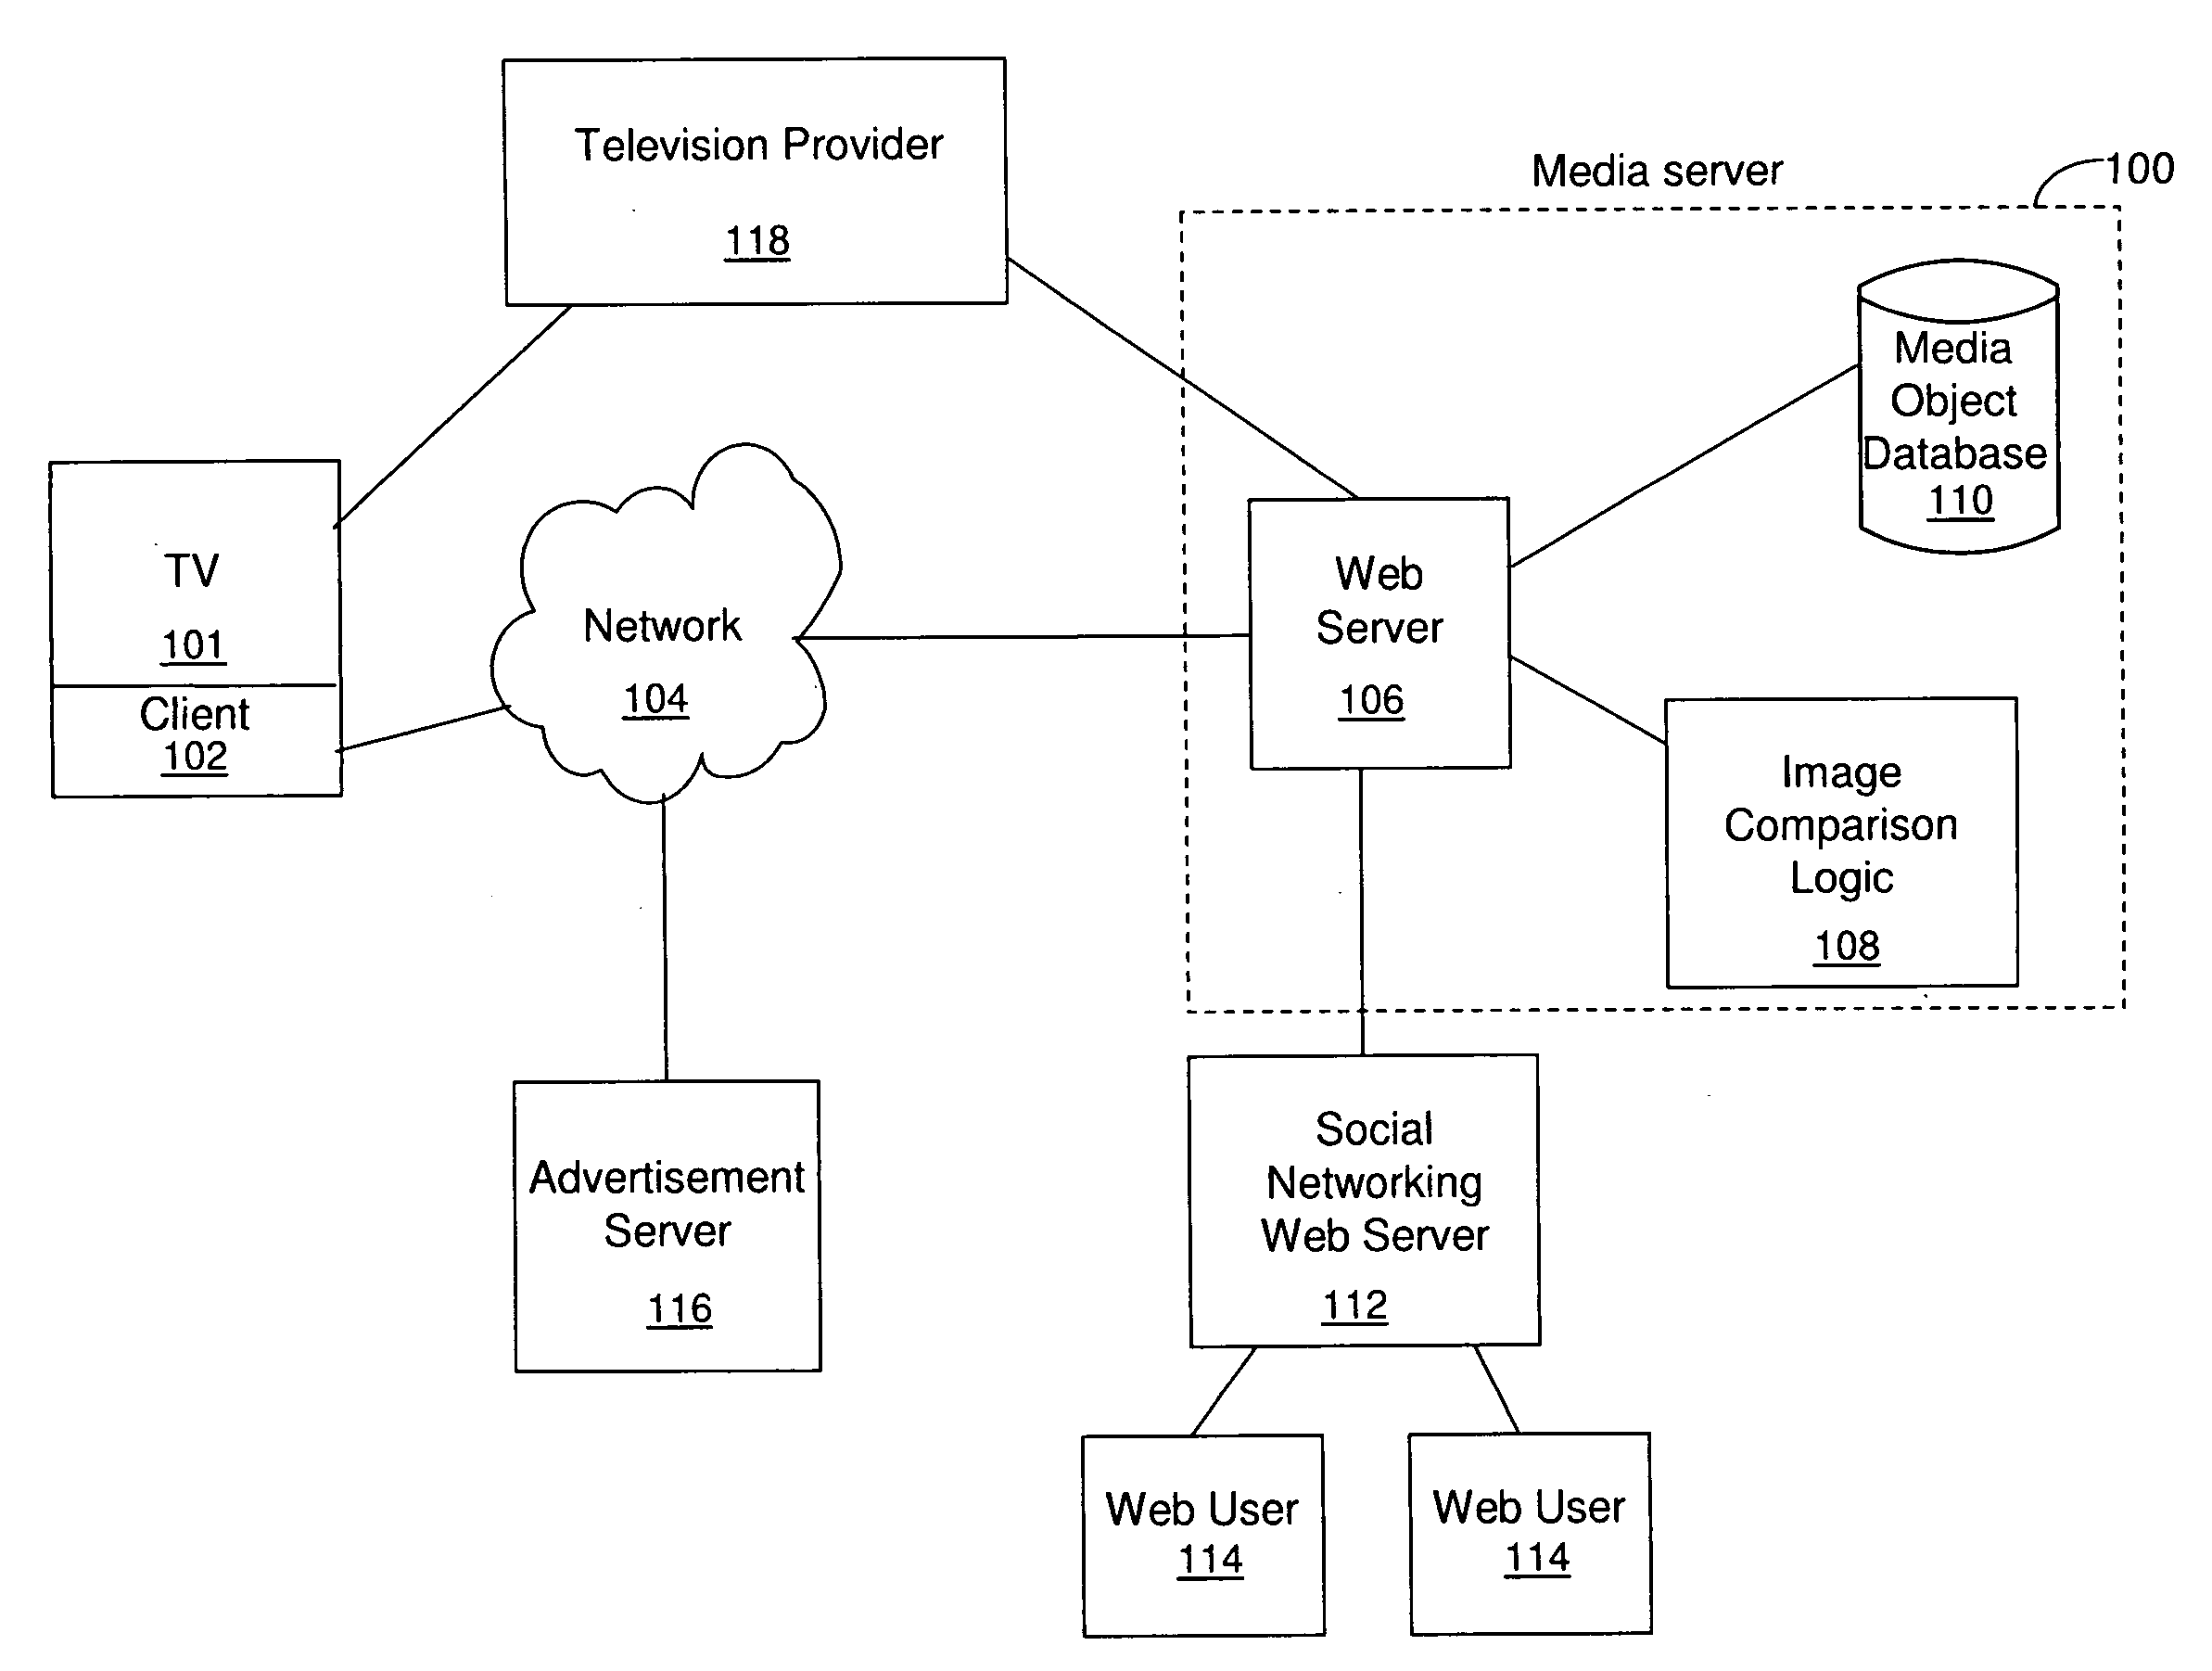 Identification and transfer of a media object segment from one communications network to another